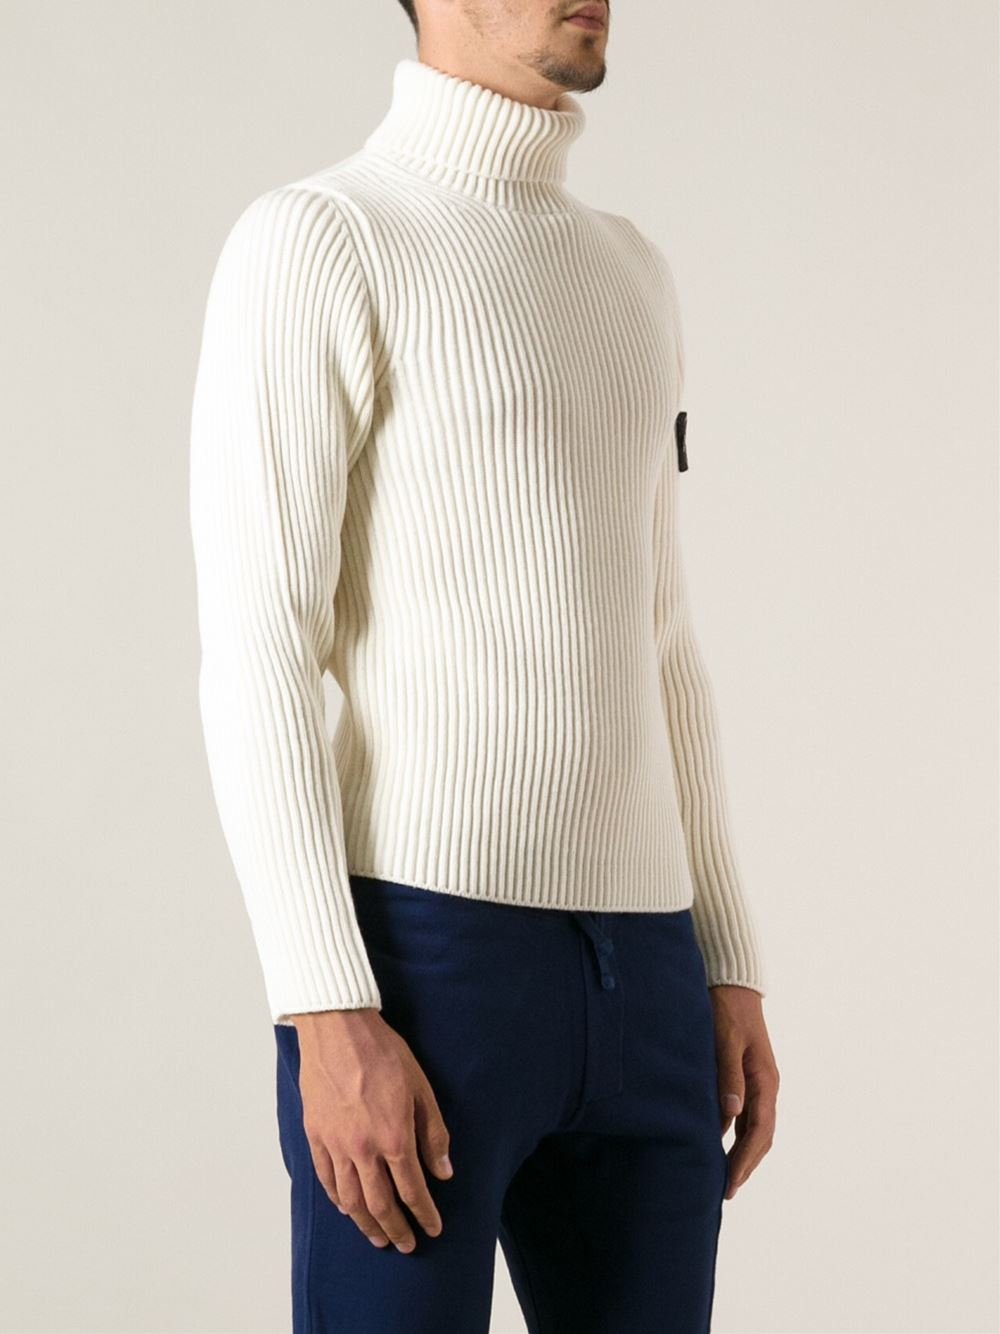 Stone Island Ribbed Sweater in White for Men